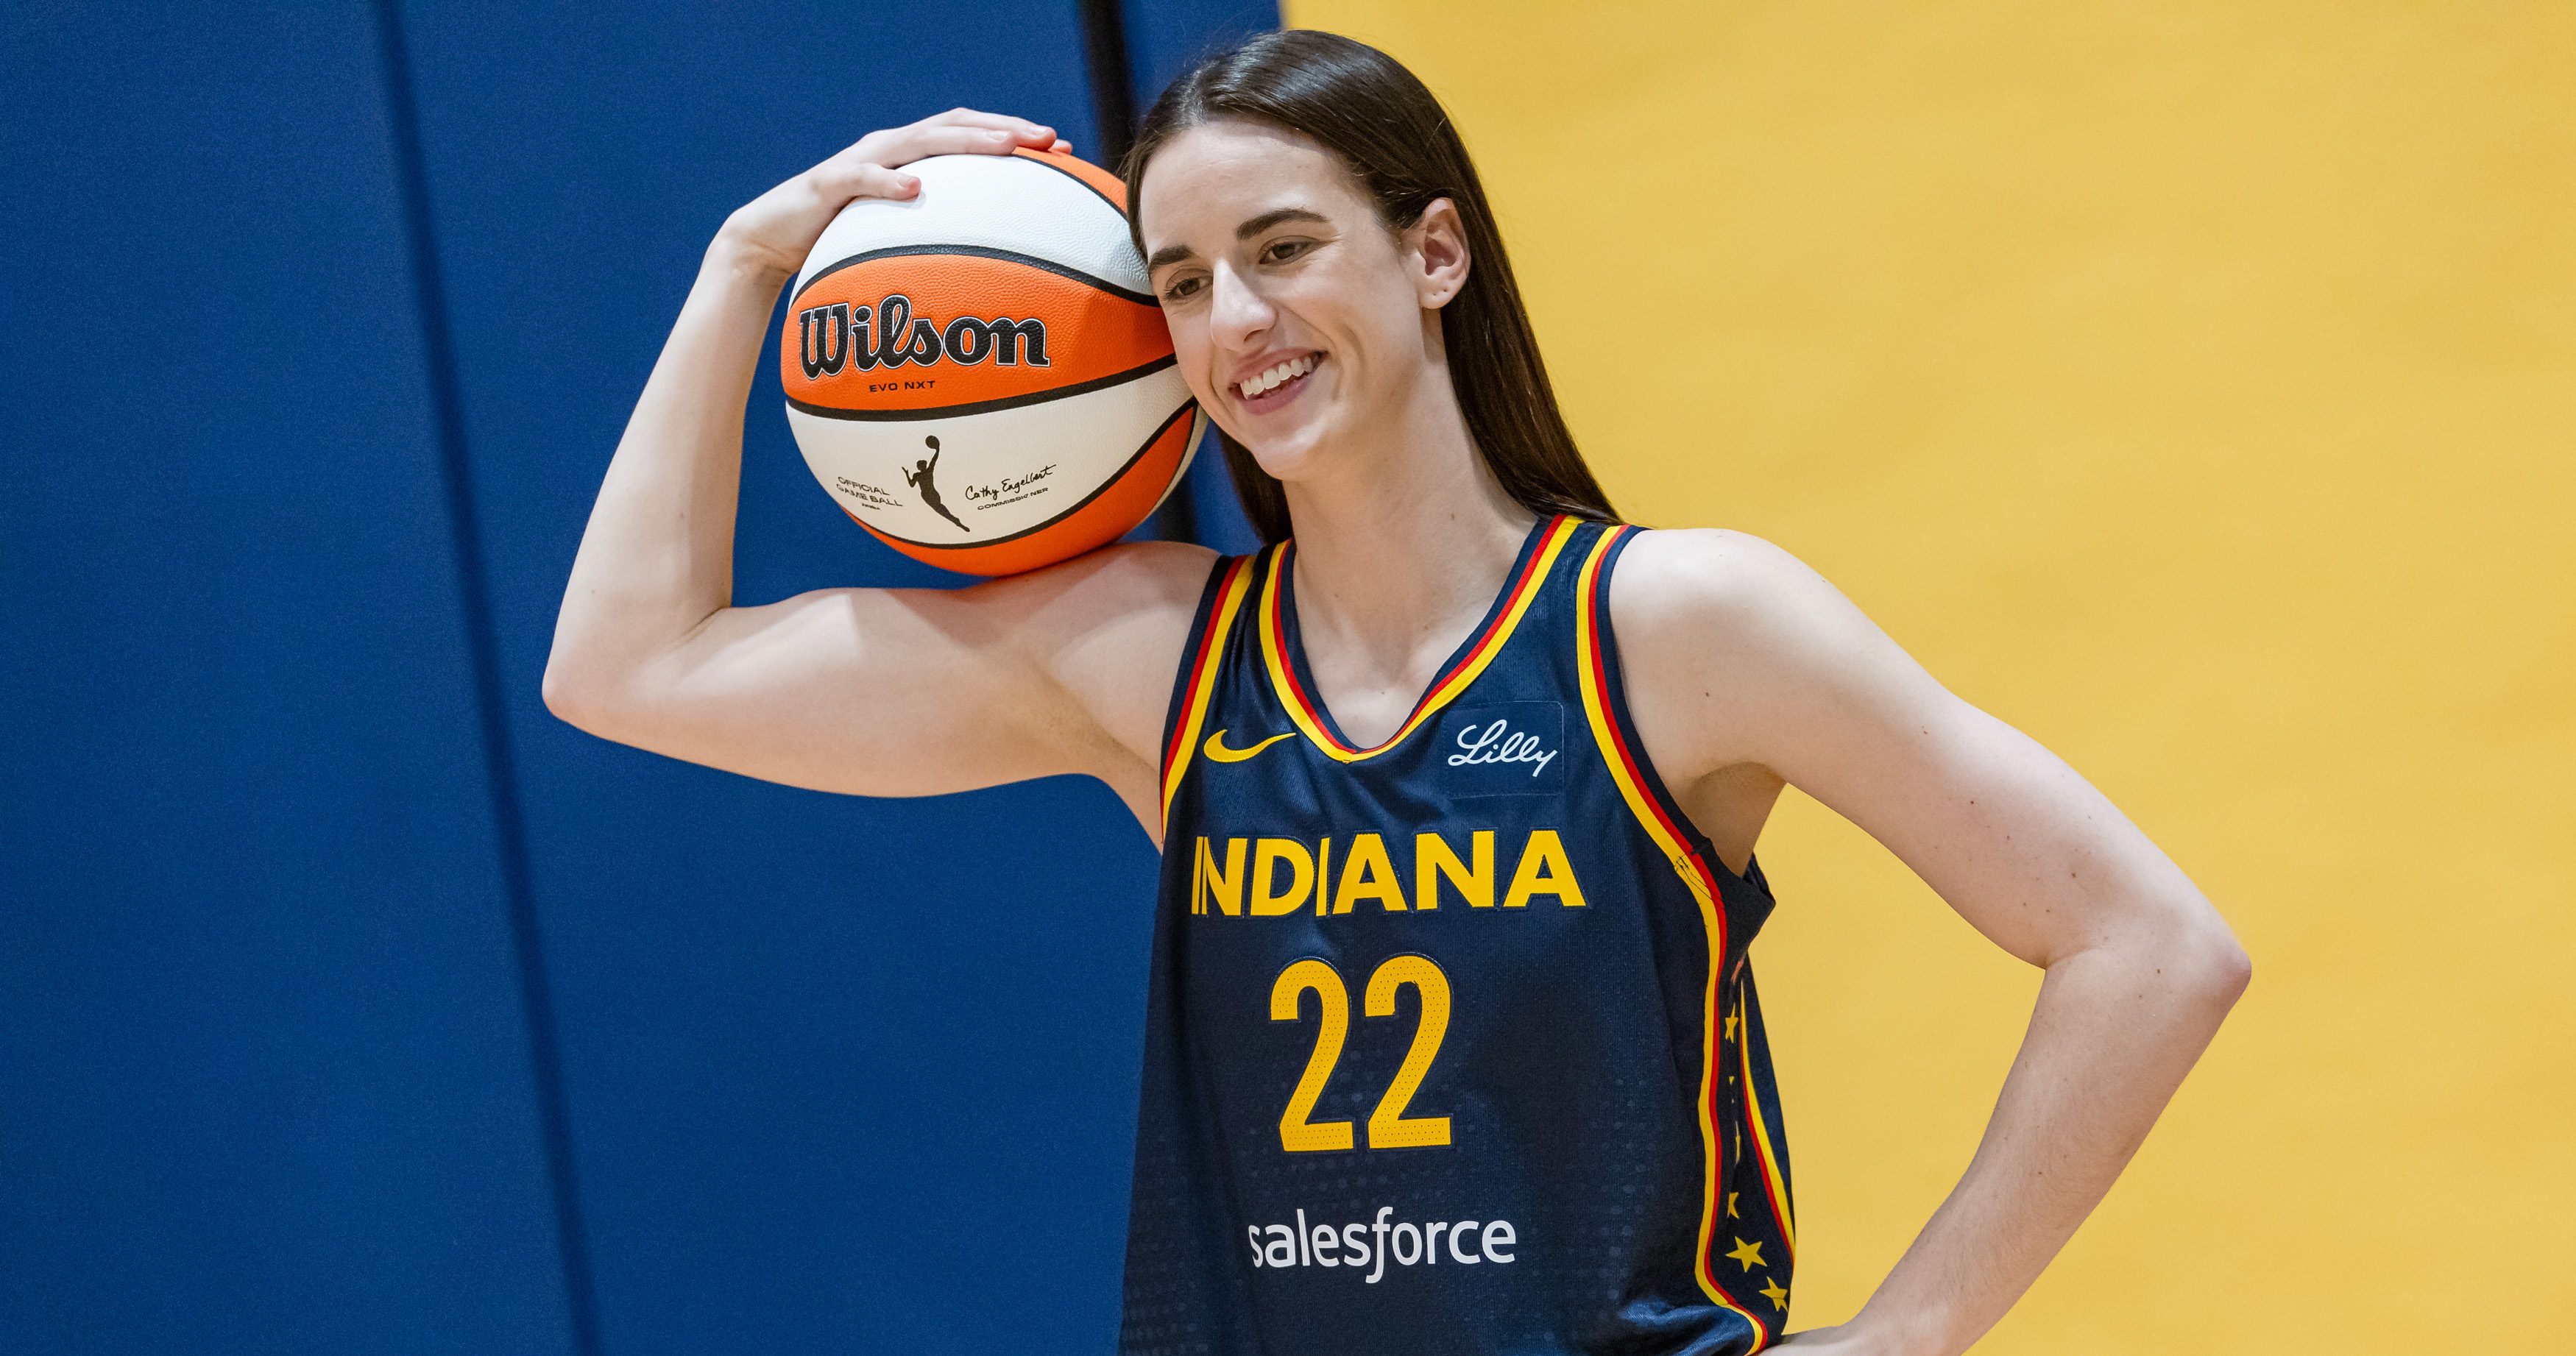 Some WNBA teams looking for bigger arenas to host Caitlin Clark, Fever